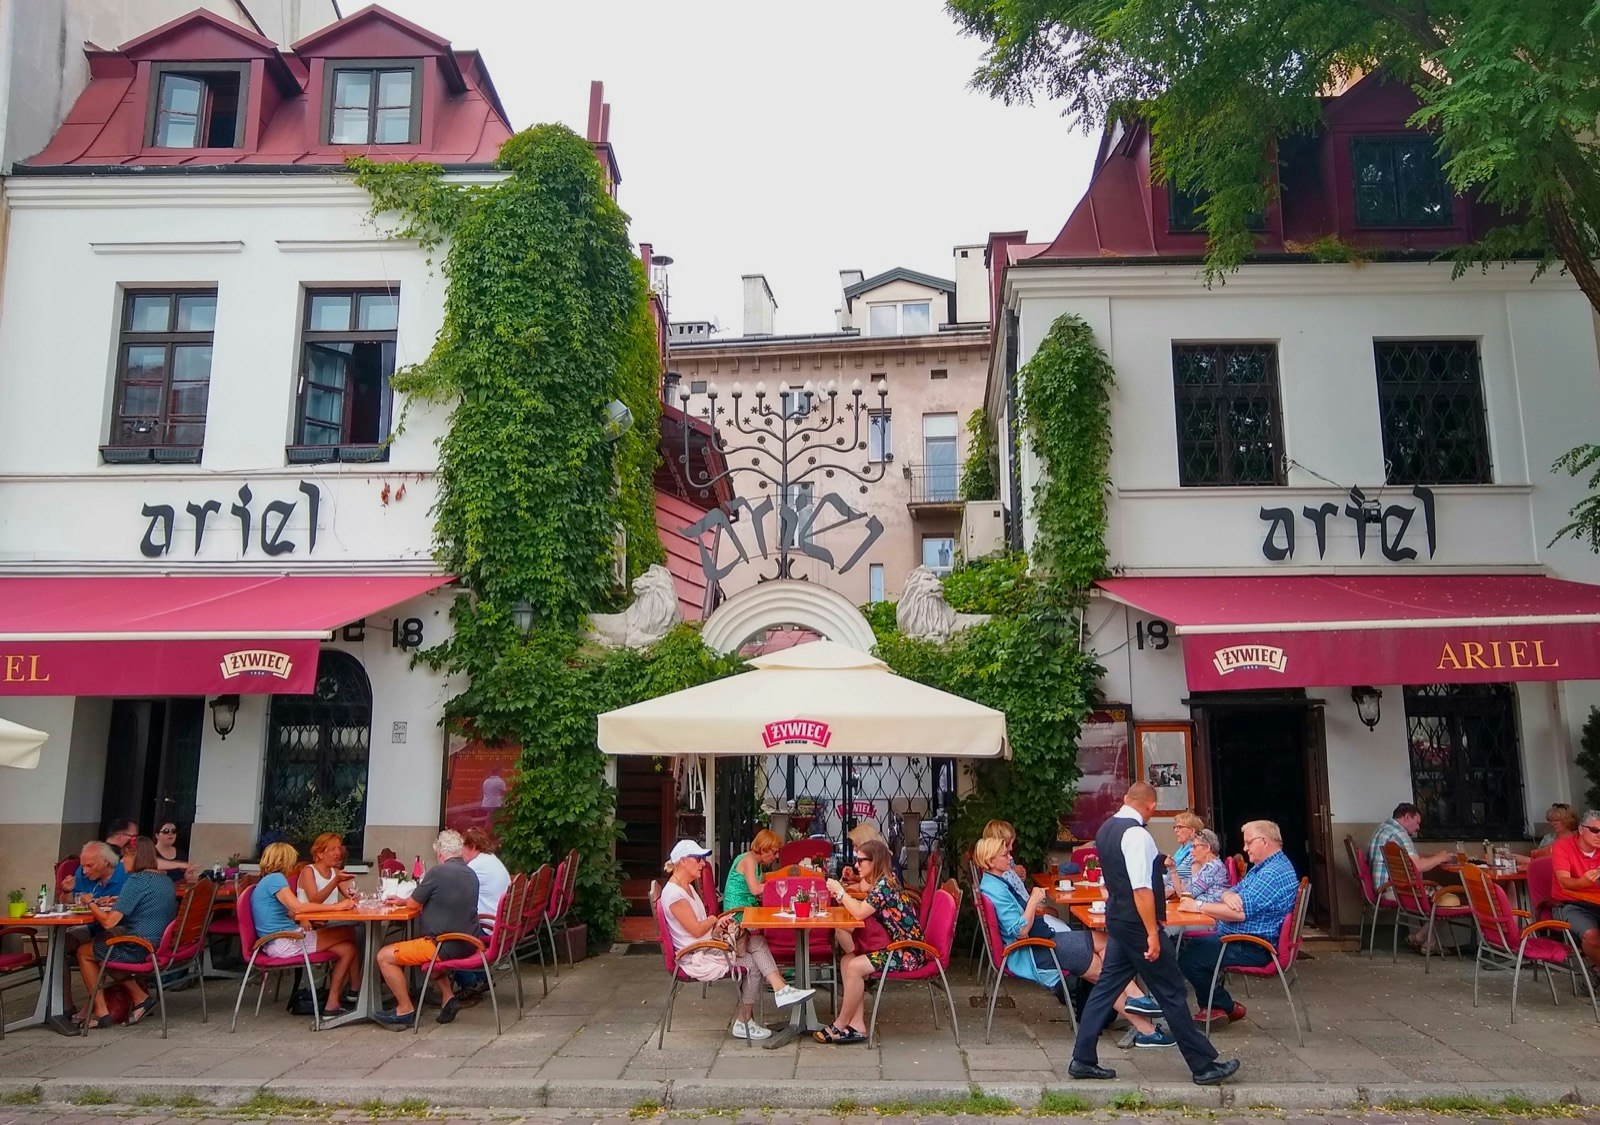 A menorah marks the top of a fence between two restaurant buildings, both with red awnings and signs that identify it as Ariel; Krakow Jewish Cultural revival